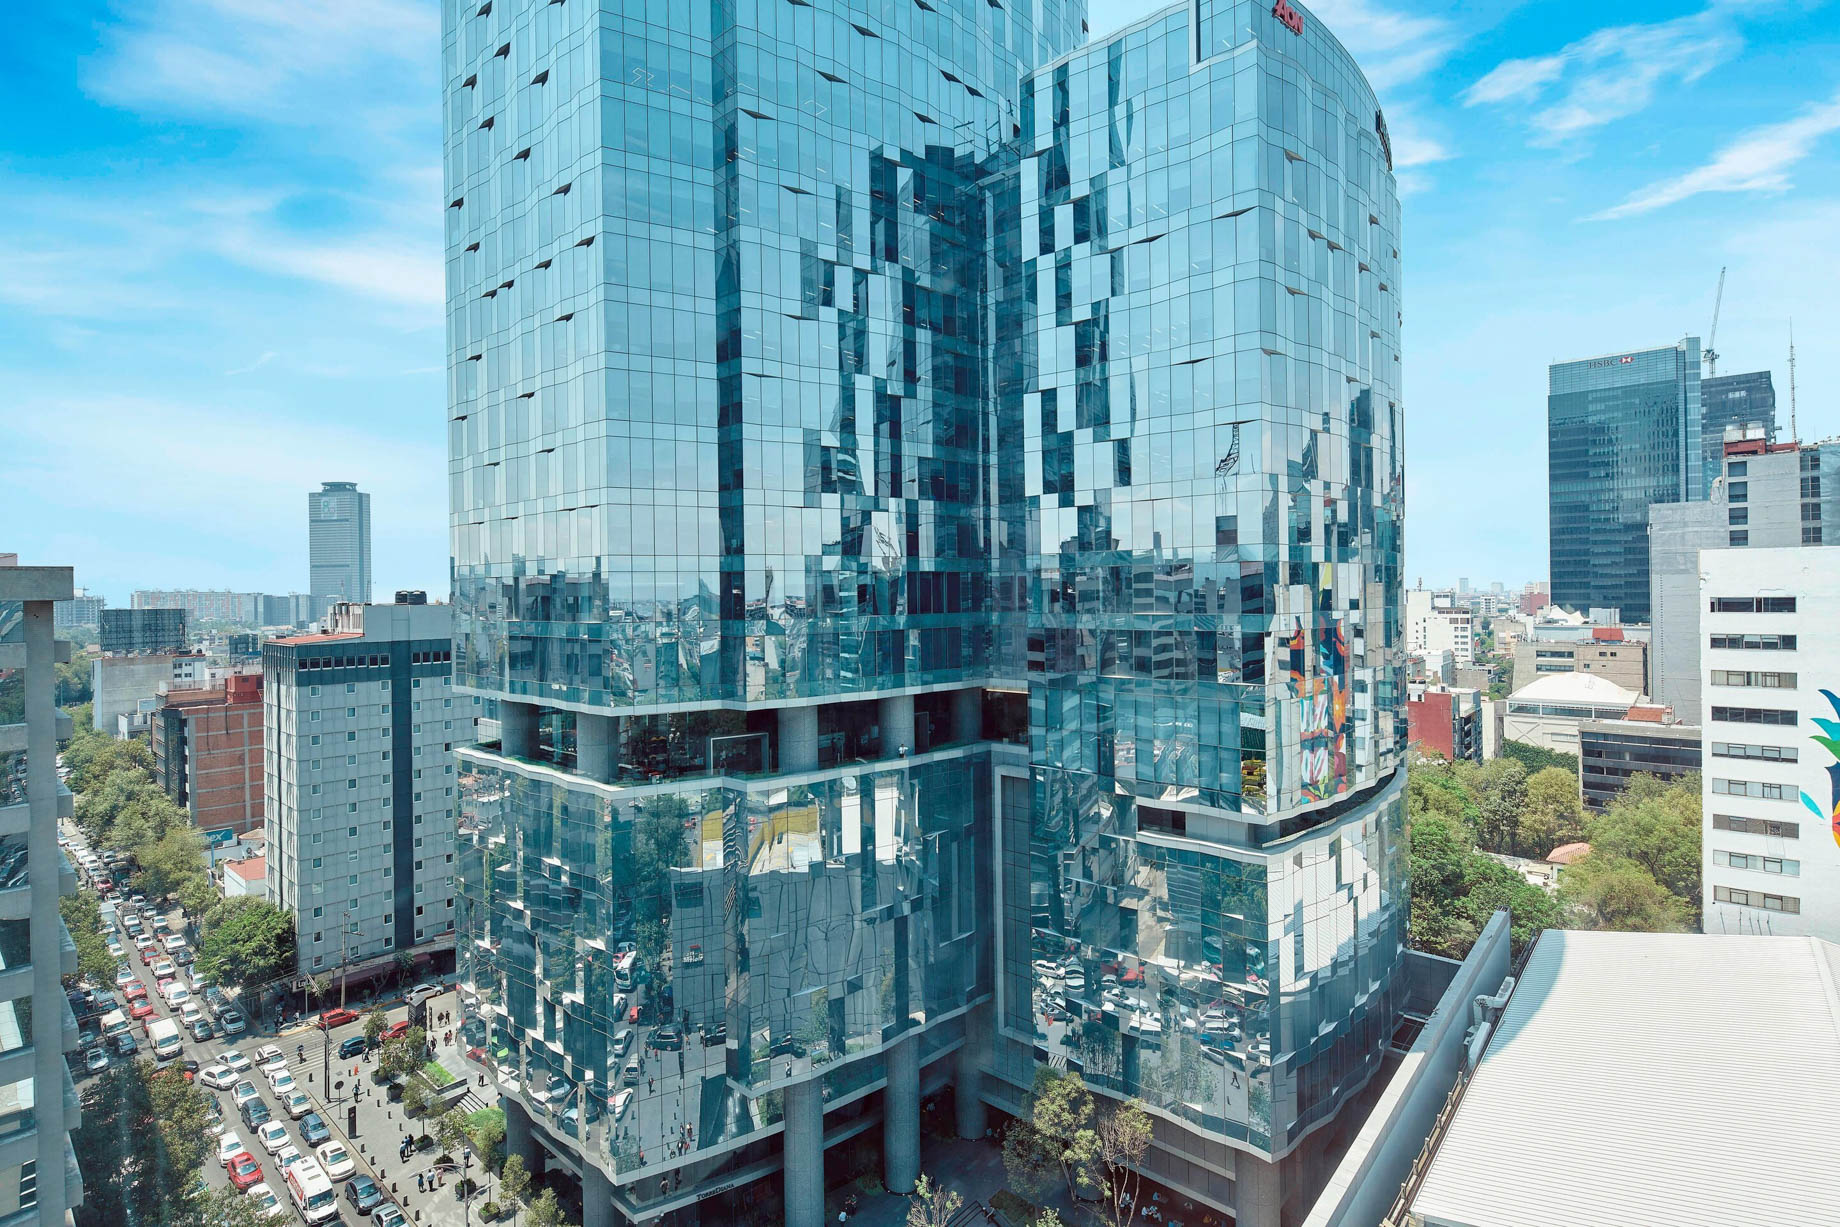 The St. Regis Mexico City Hotel – Mexico City, Mexico – Signature Guest Room View